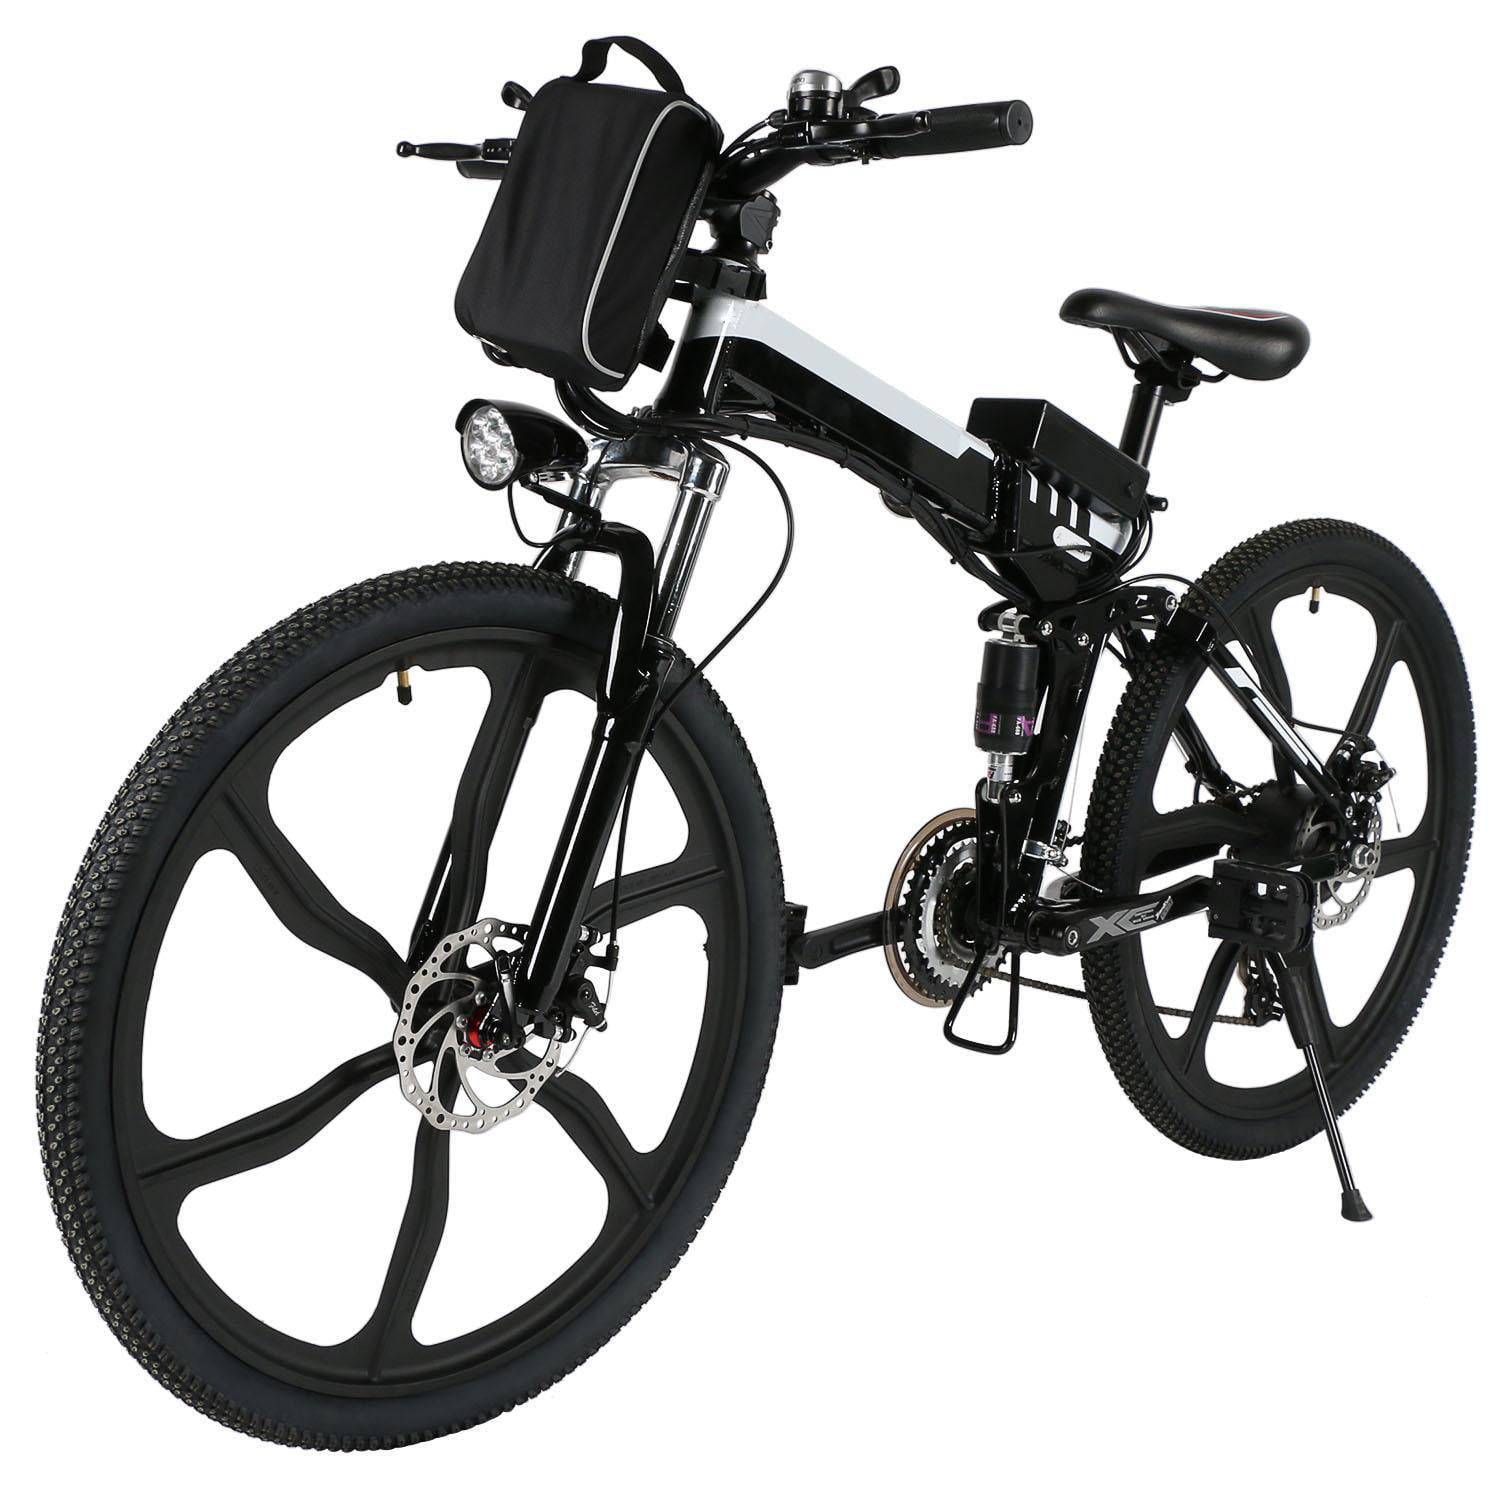 and APP Speed Setting 350W 36V Waterproof E-Bike with 15 Mile Range Collapsible Frame shaofu Folding Electric Bicycle